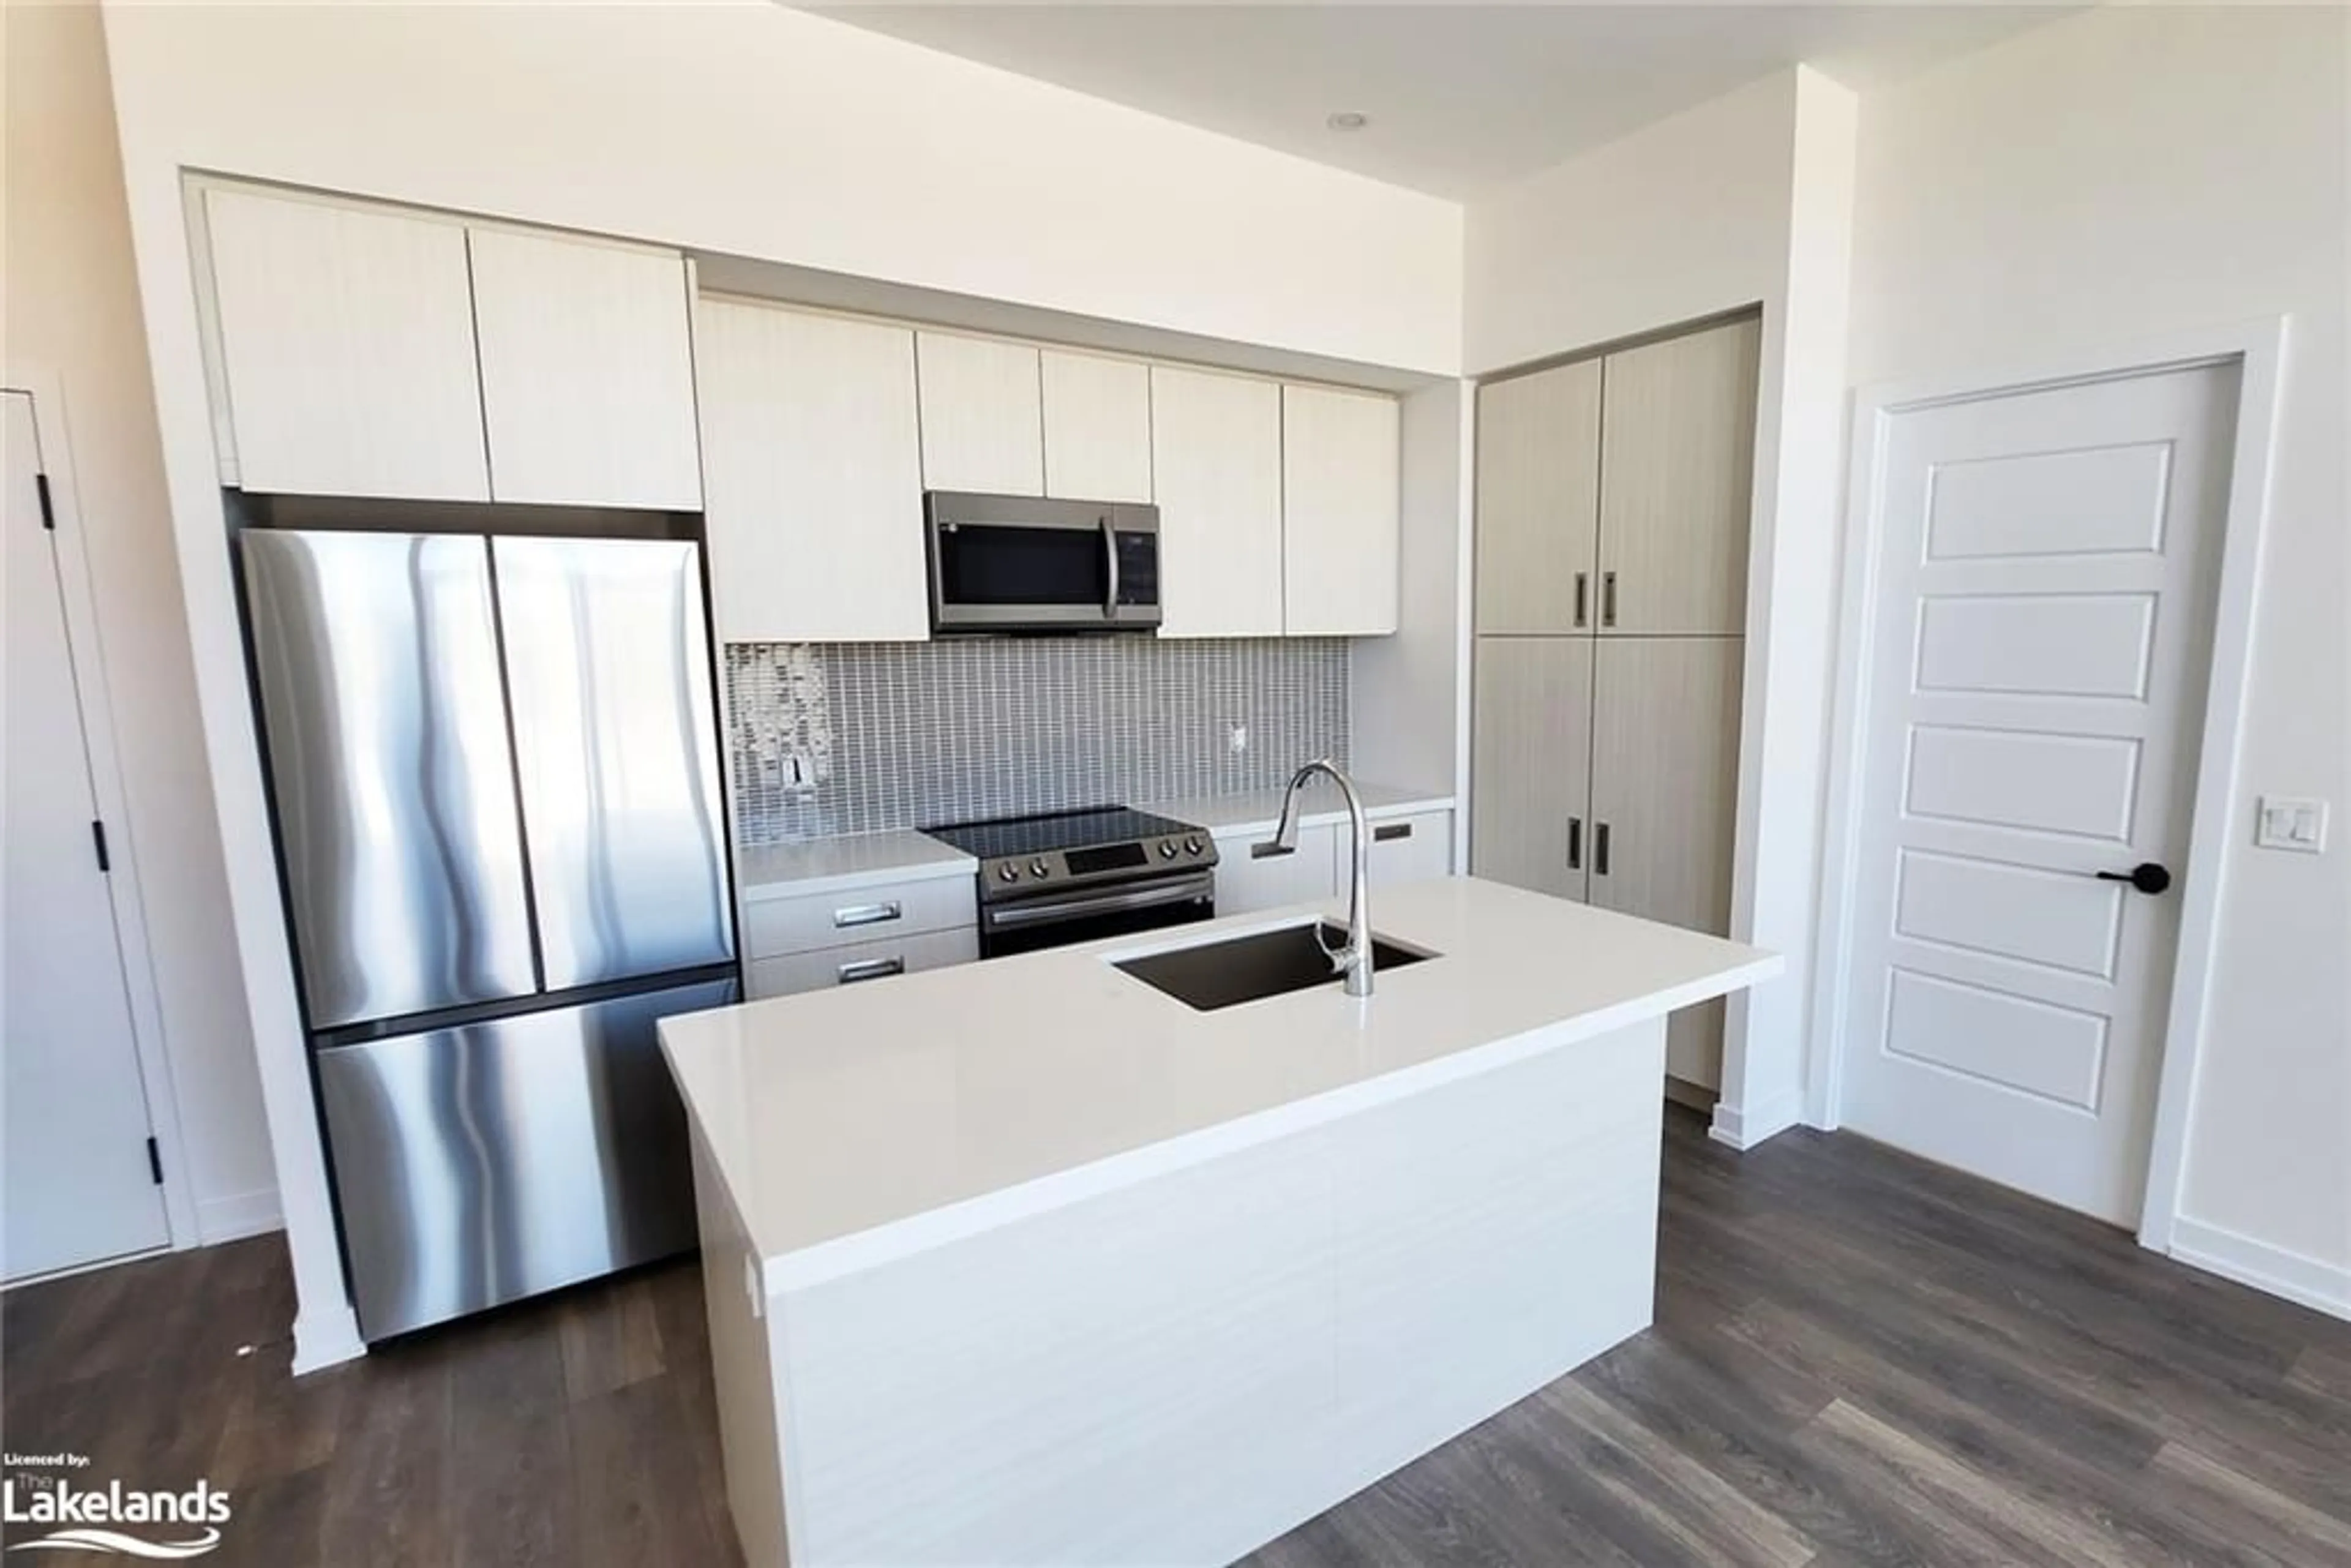 Standard kitchen for 415 Sea Ray Ave, Innisfil Ontario L9S 0R5